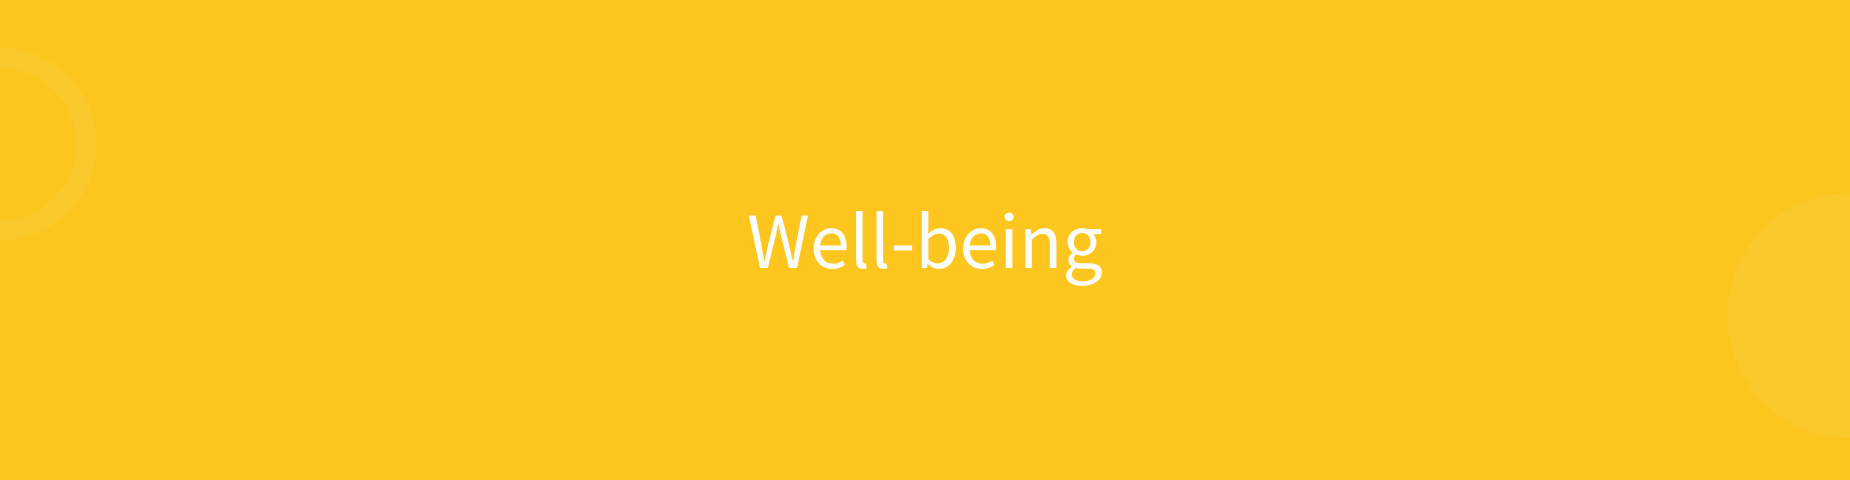 Well-being Header English